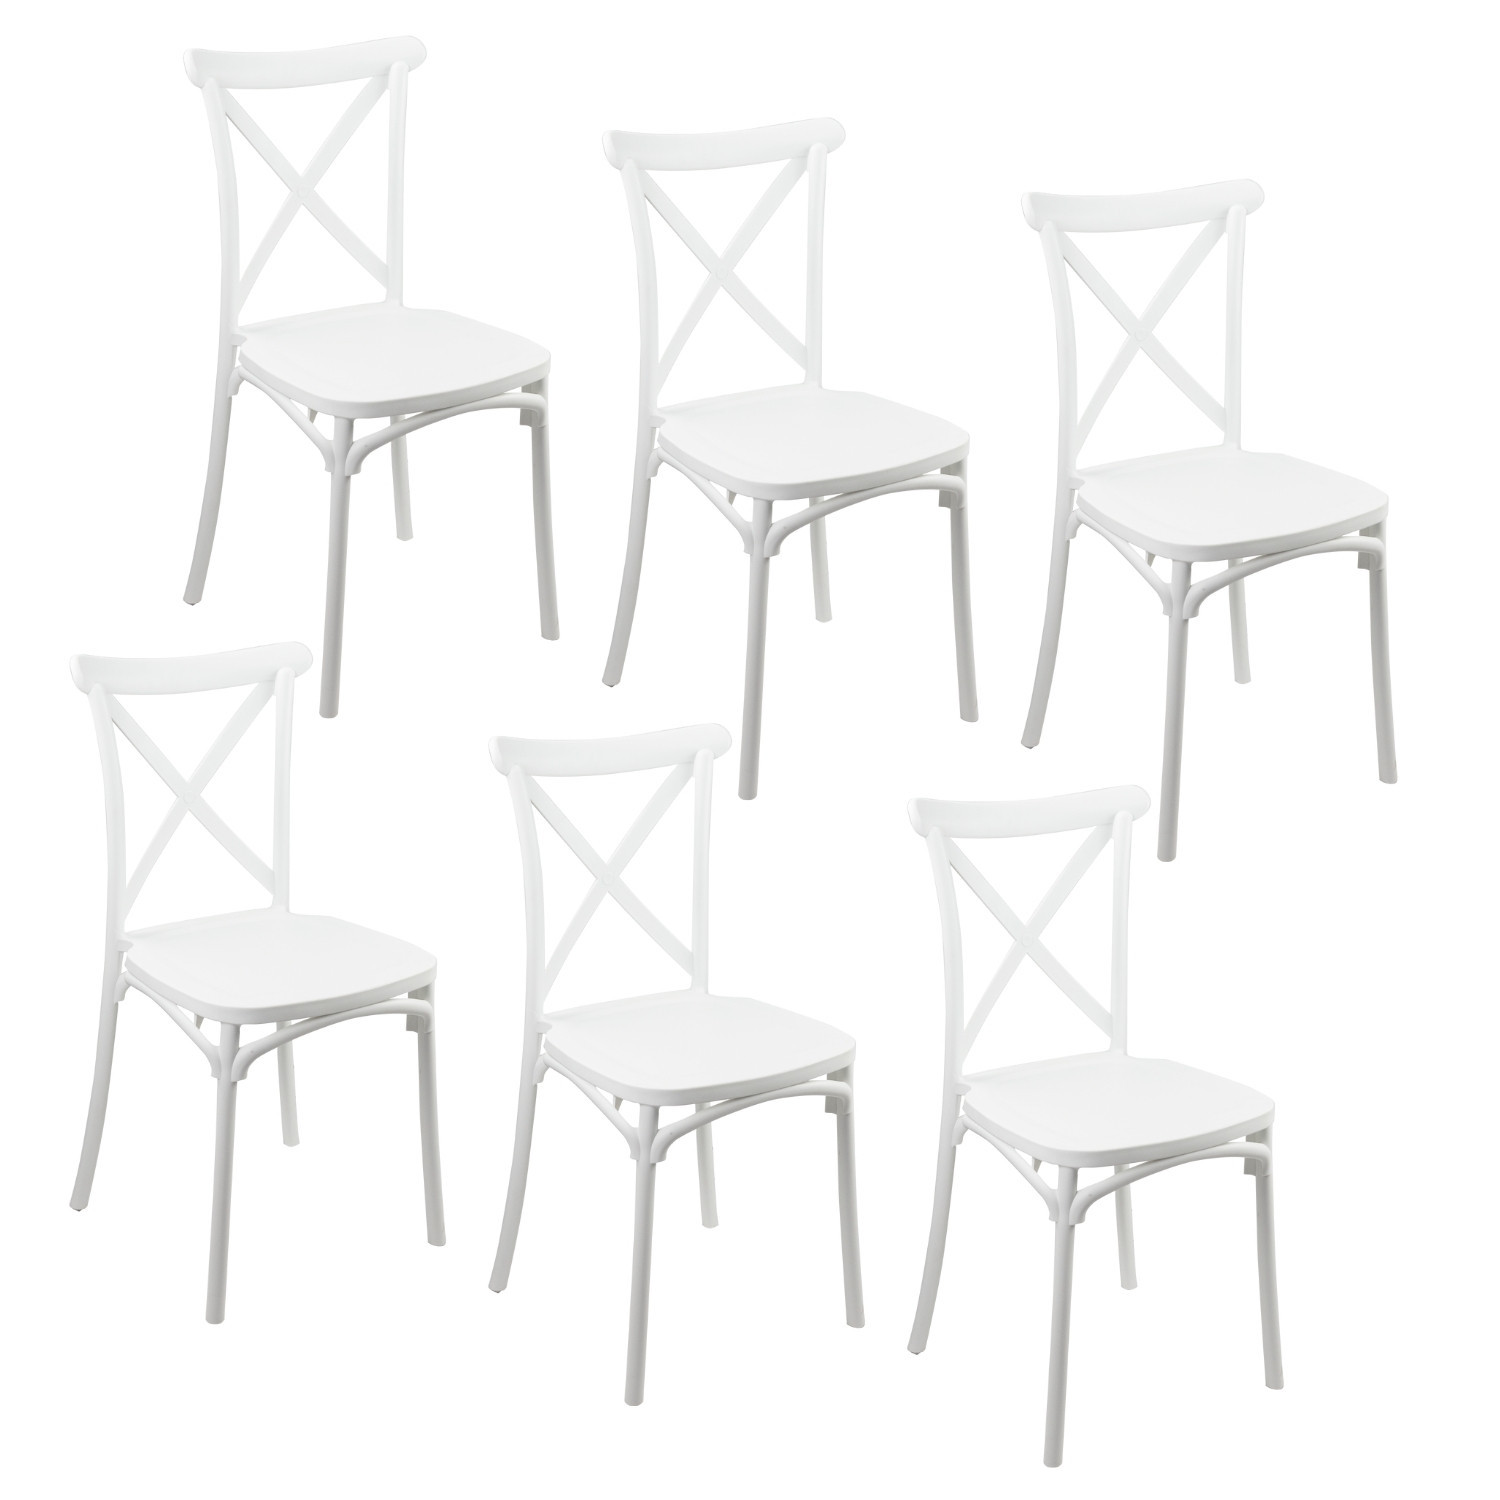 Pack 6 Sillas para Catering Apilables Charlotte 50x44x87.5cm 7house Sillas y Sillones de Exterior 1